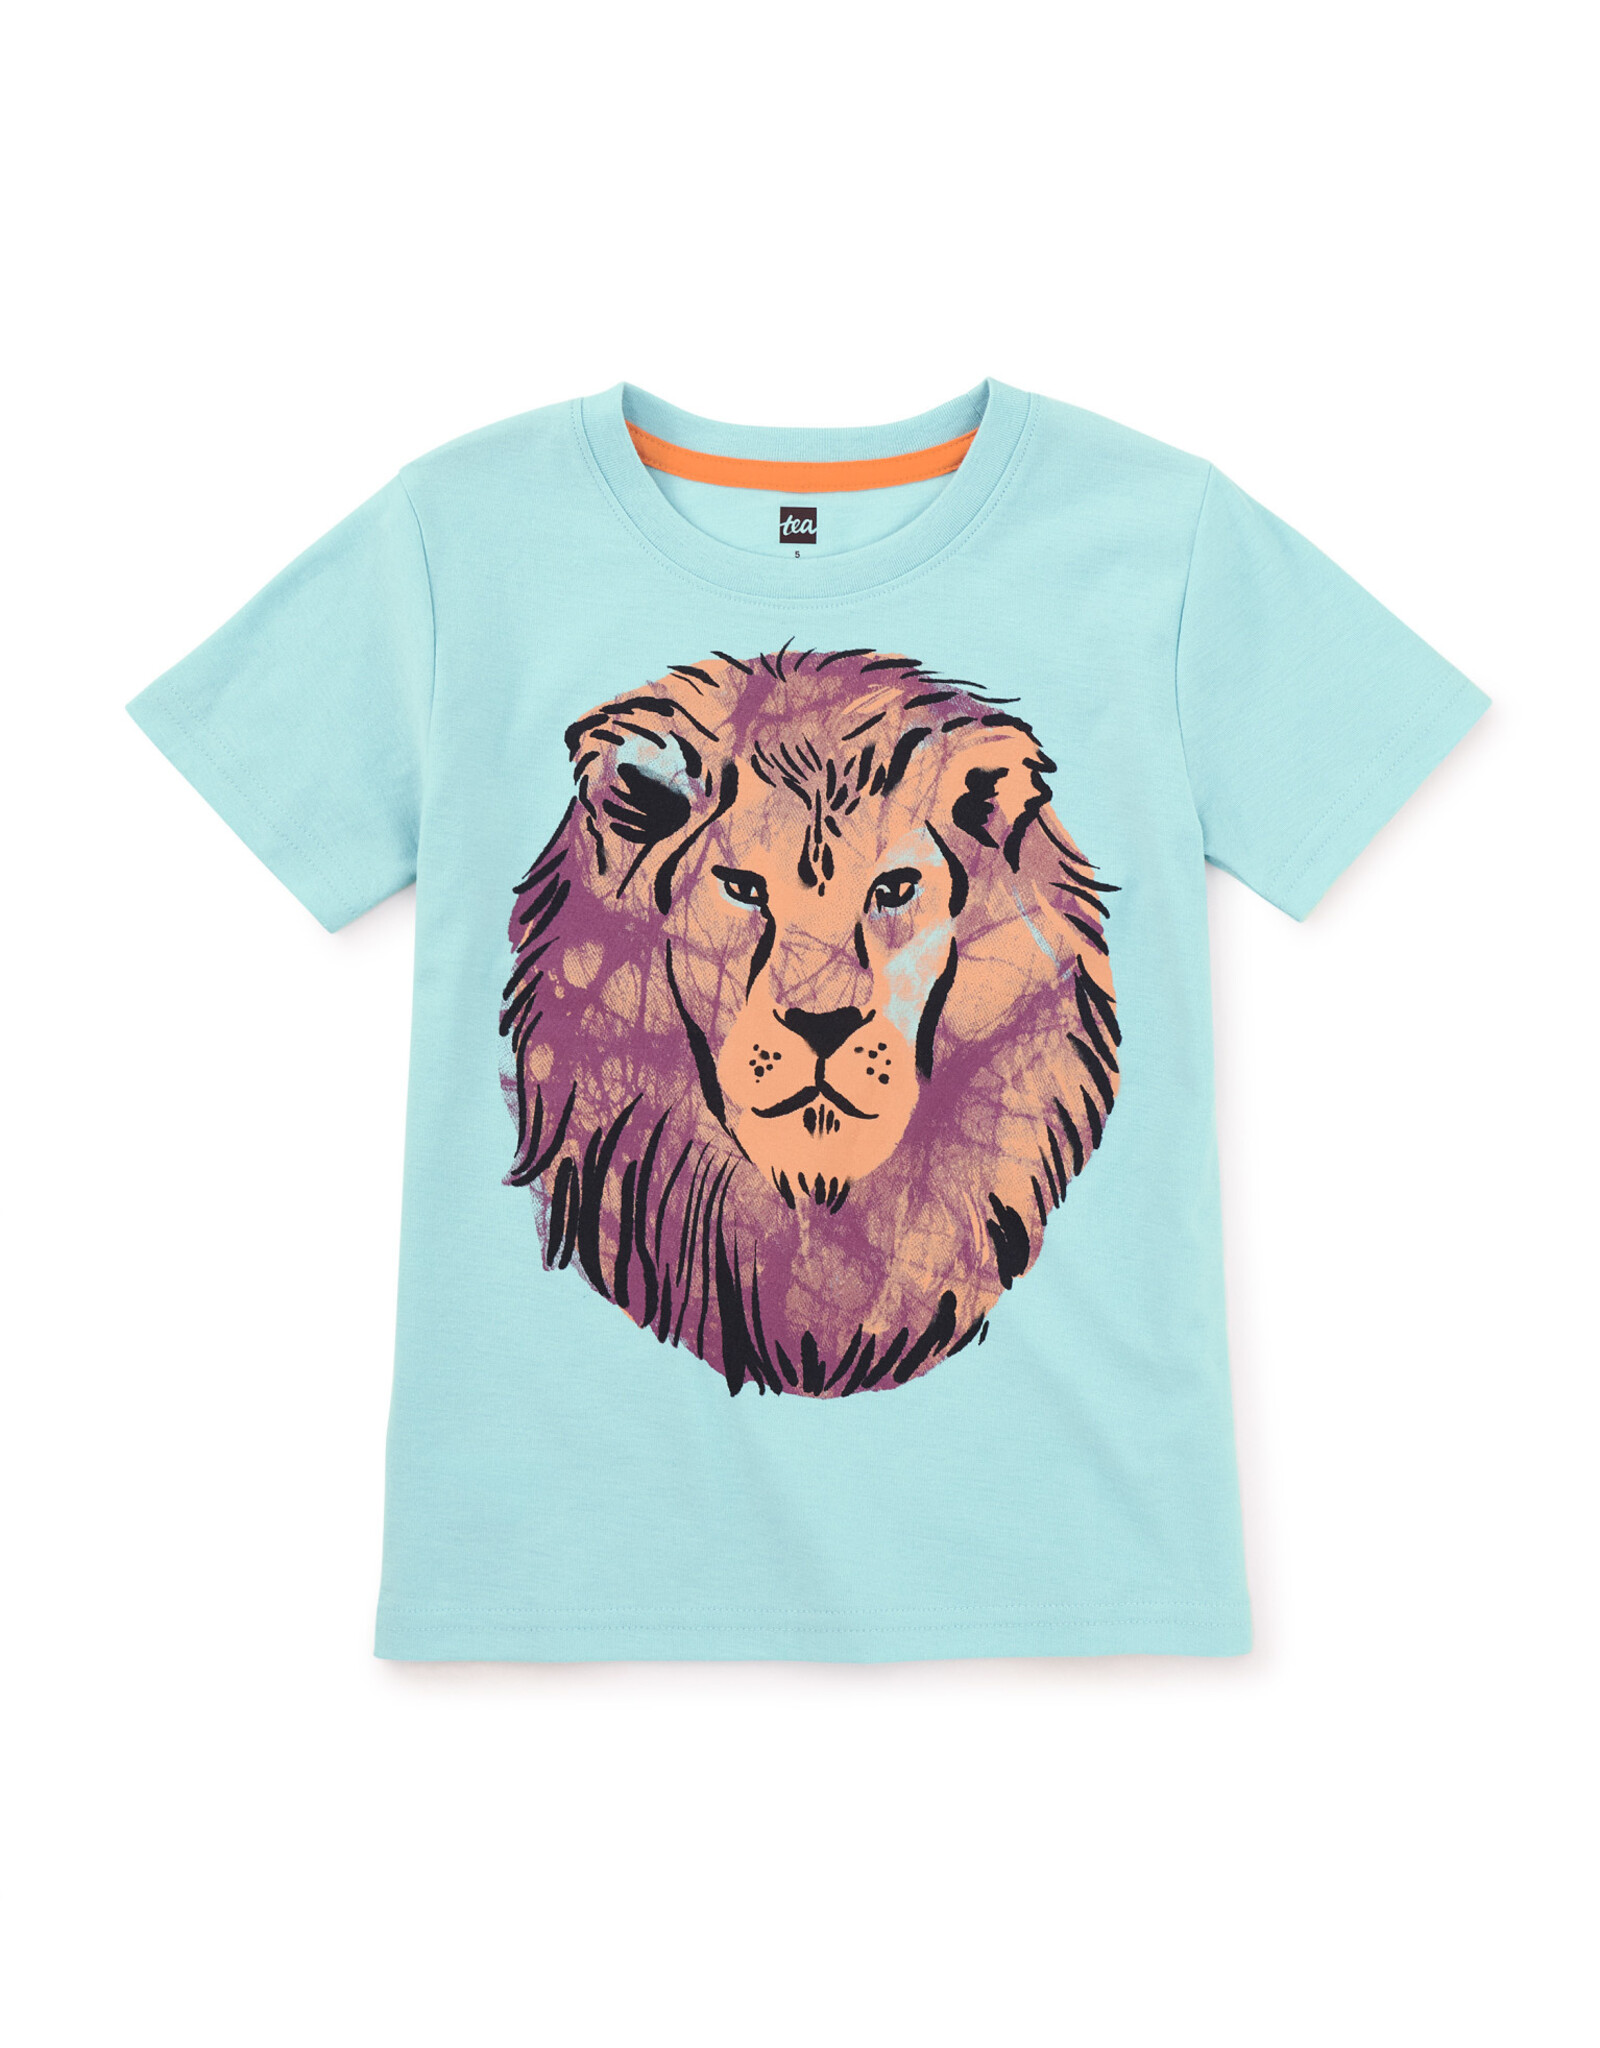 Tea Lion Graphic Tee / Canal Blue